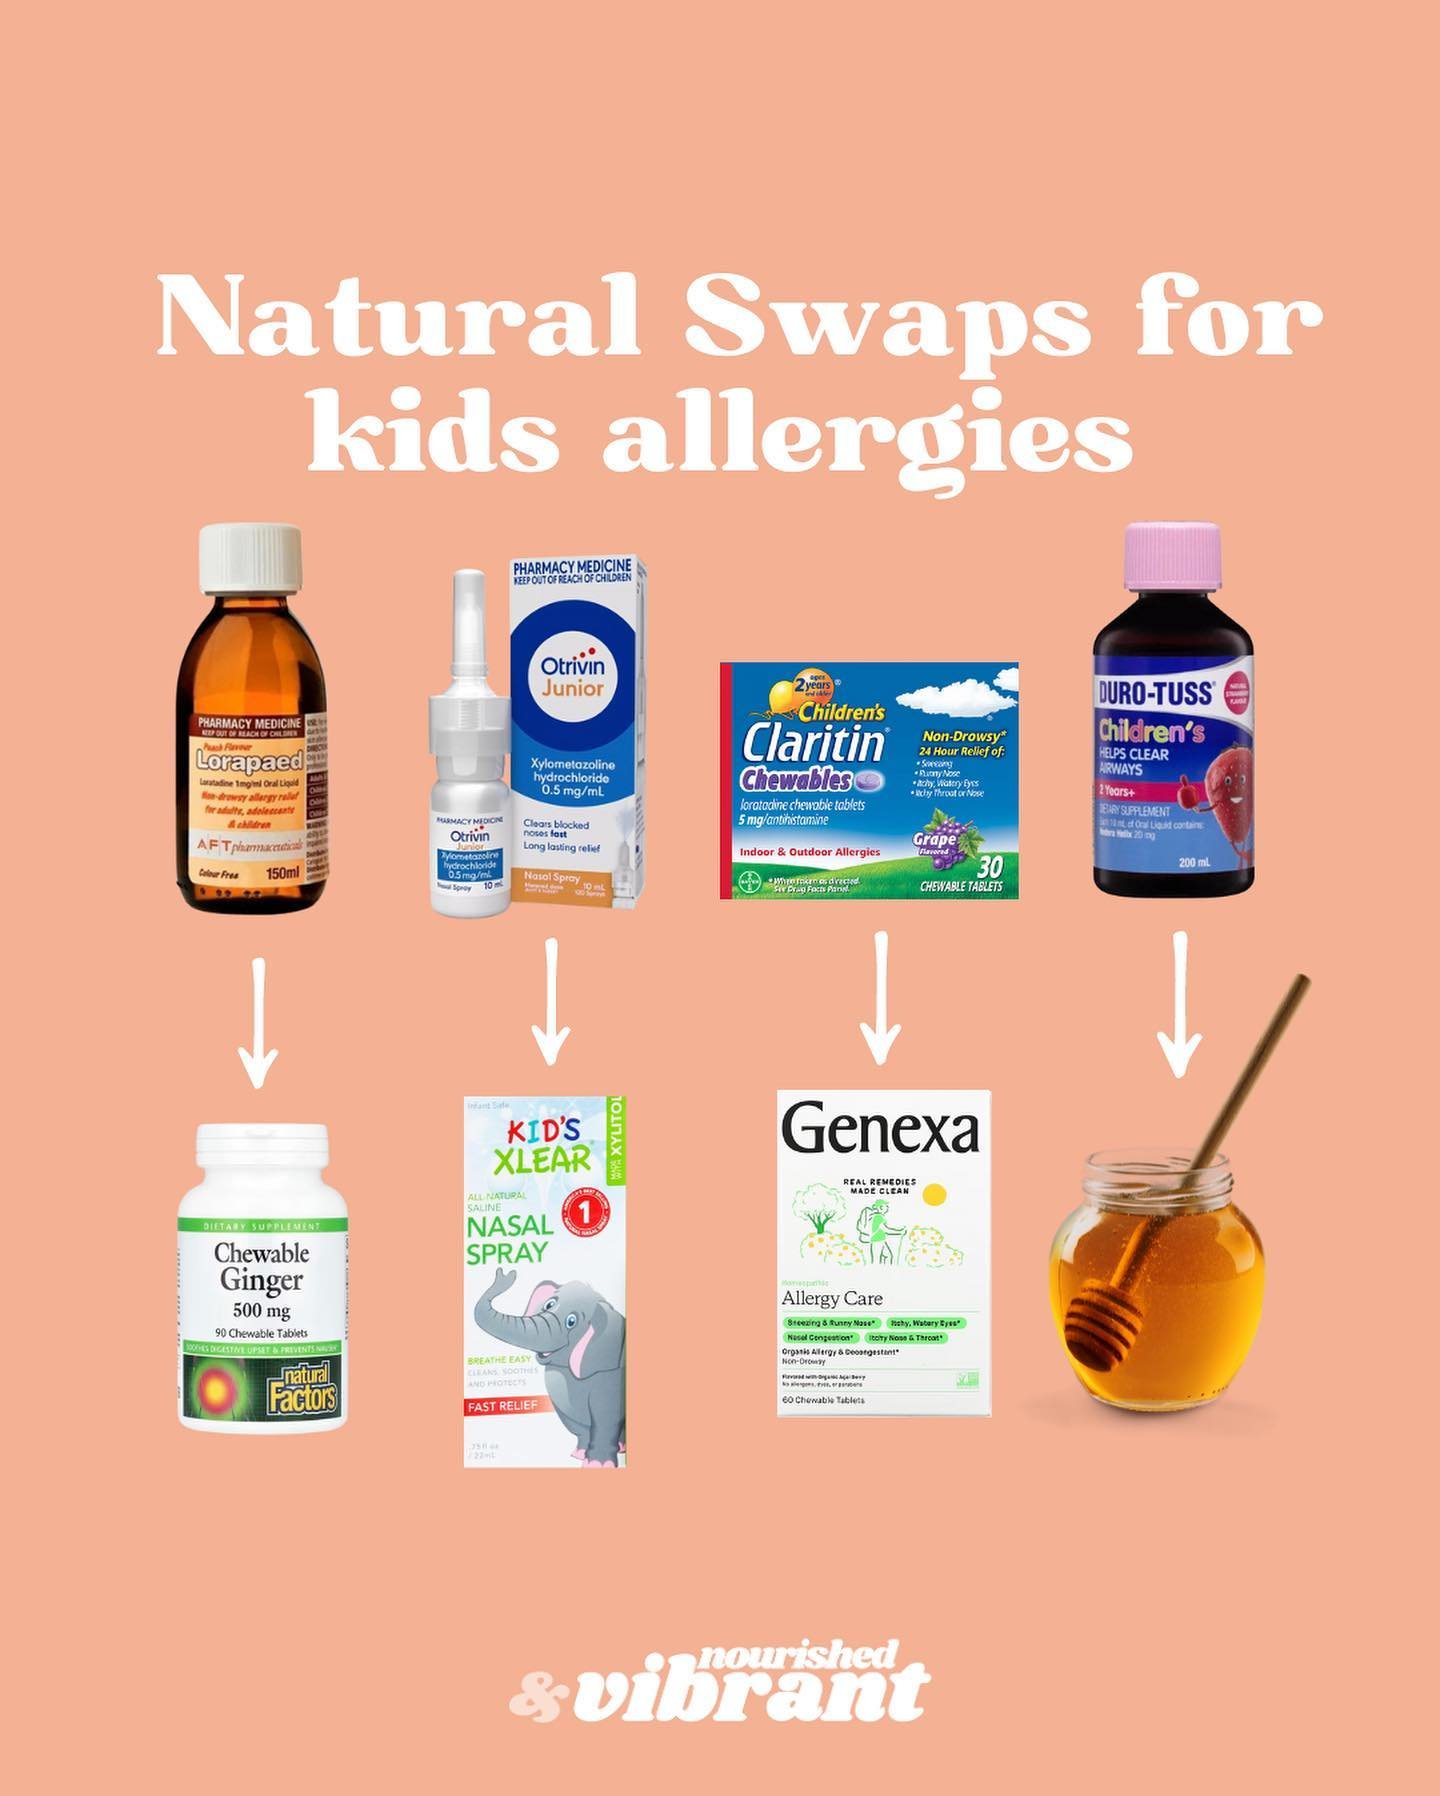 👃Comment &ldquo;ALLERGIES&rdquo; for my hayfever oil blend recipe and links to where to buy natural alternatives 👃

I&rsquo;ve talked to so many parents who&rsquo;s kiddos are on daily antihistamines, no shade mama, you&rsquo;re doing your best ❤️ 